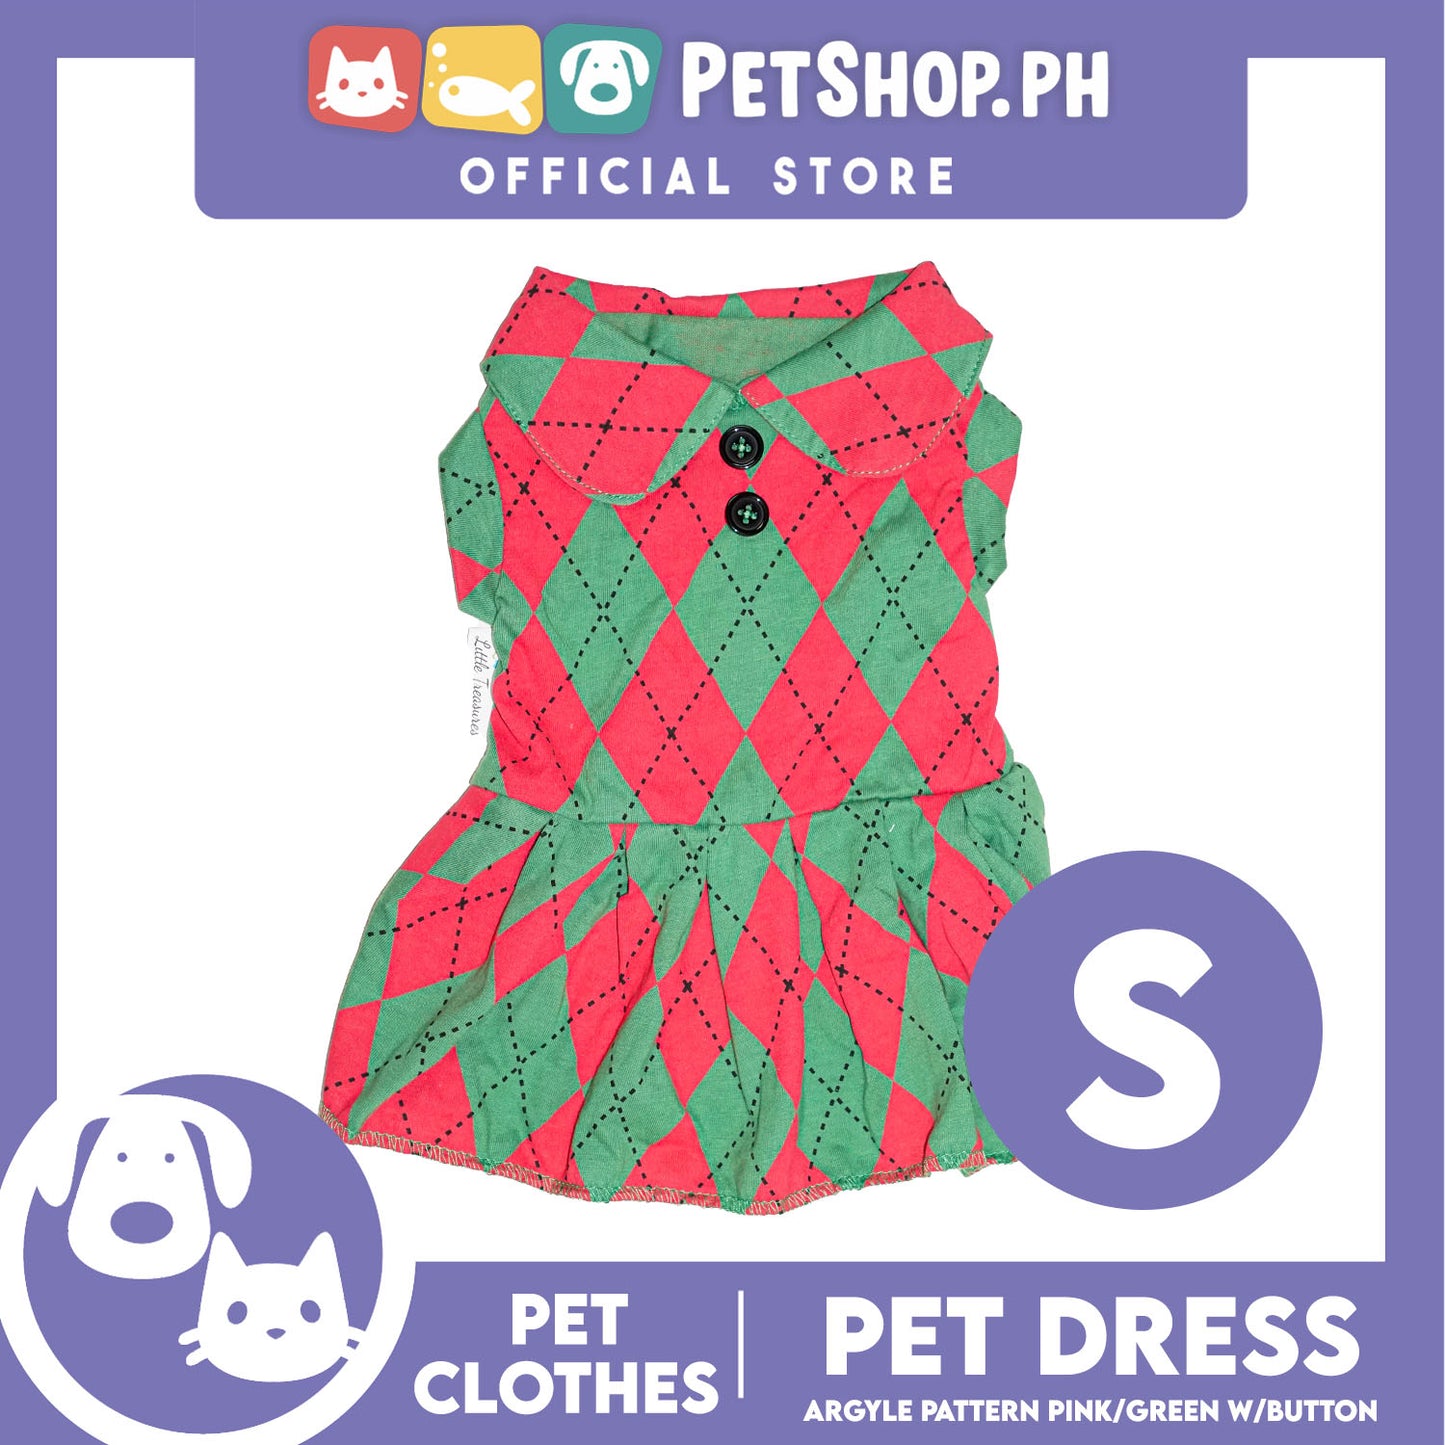 Pet Dress Argyle Pink/Green with Button Dress (Small) Perfect Fit for Dogs and Cats